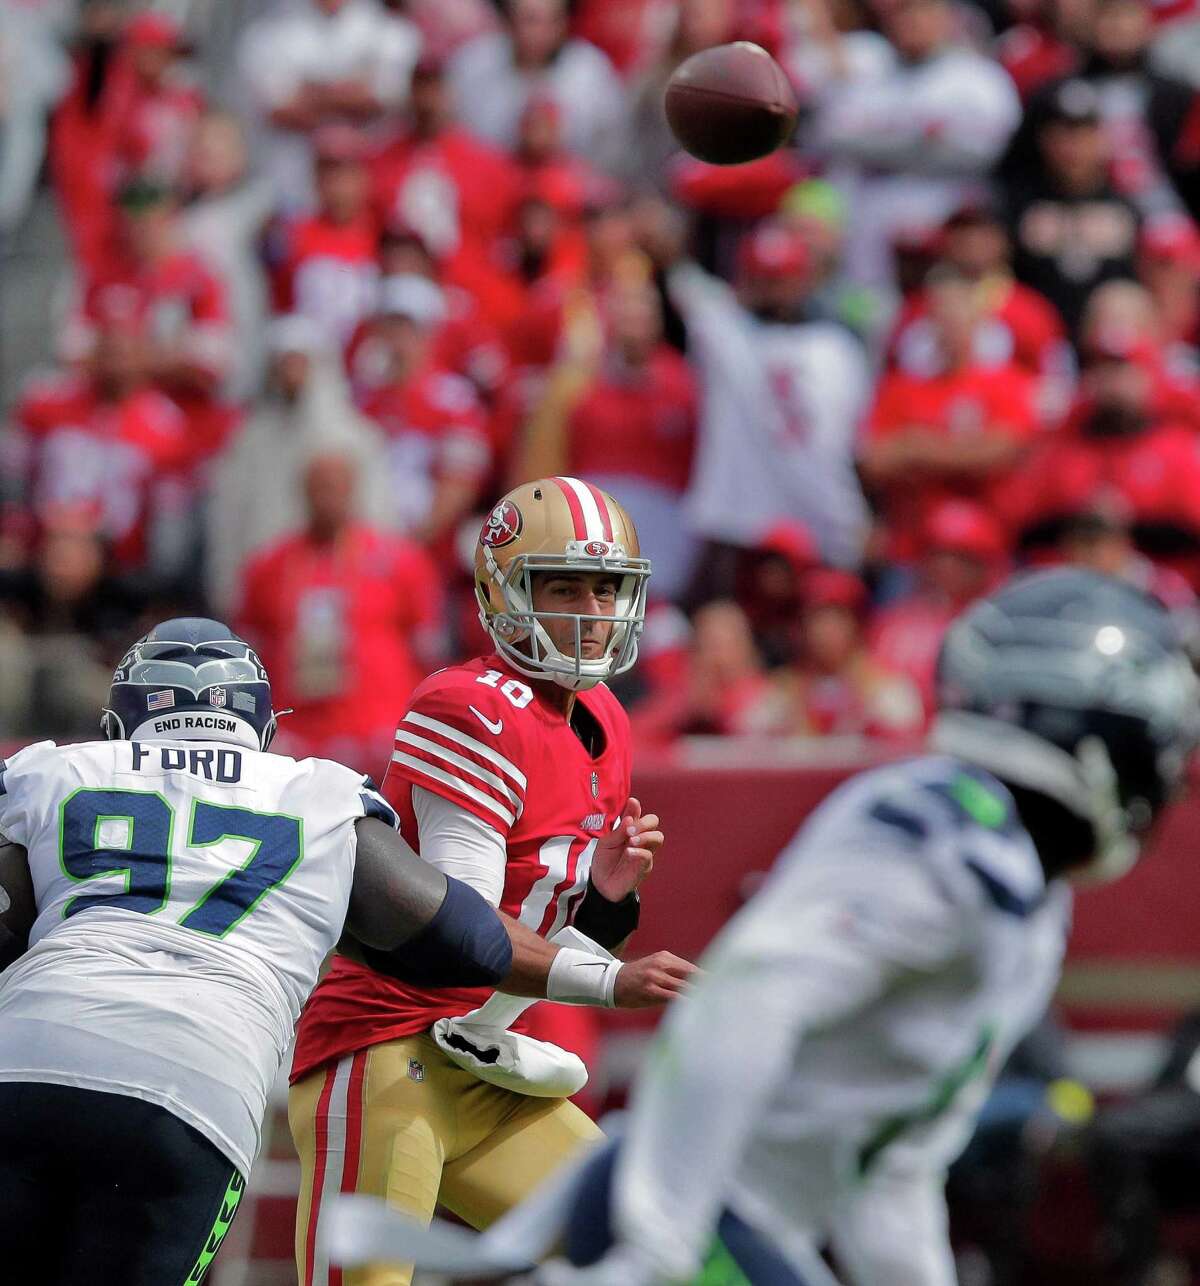 Jimmy Garoppolo (10) throws to Brandon Aiyuk (11) in the second half as the San Francisco 49ers played the Seattle Seahawks at Levi’s Stadium in Santa Clara, Calif., on Sunday, September 18, 2022.